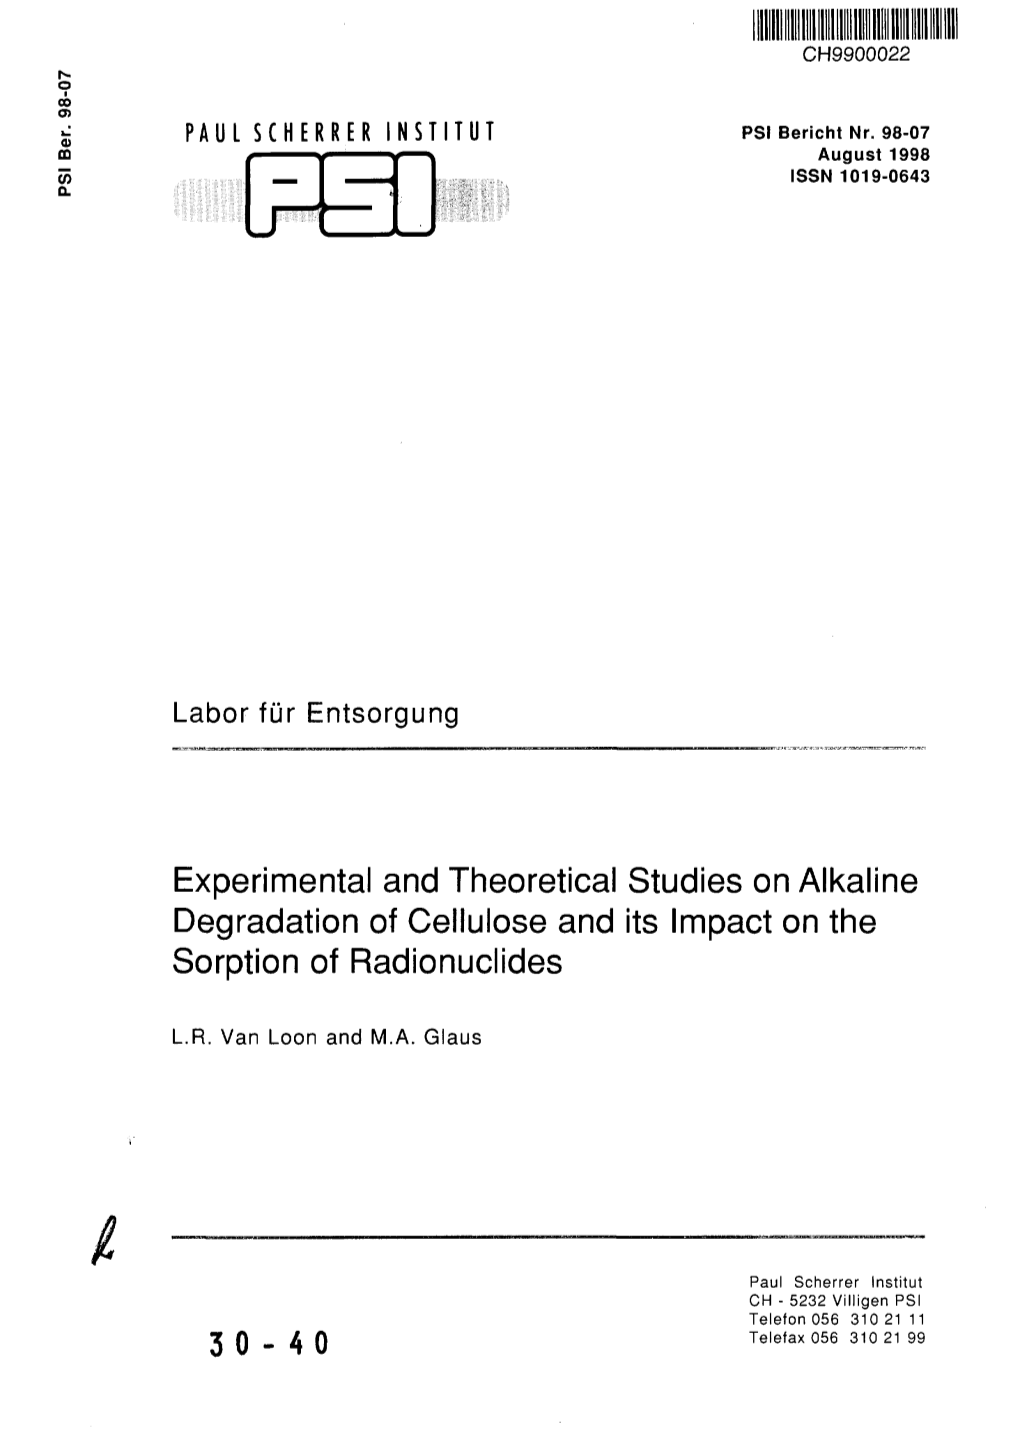 Experimental and Theoretical Studies on Alkaline Degradation of Cellulose and Its Impact on the Sorption of Radionuclides